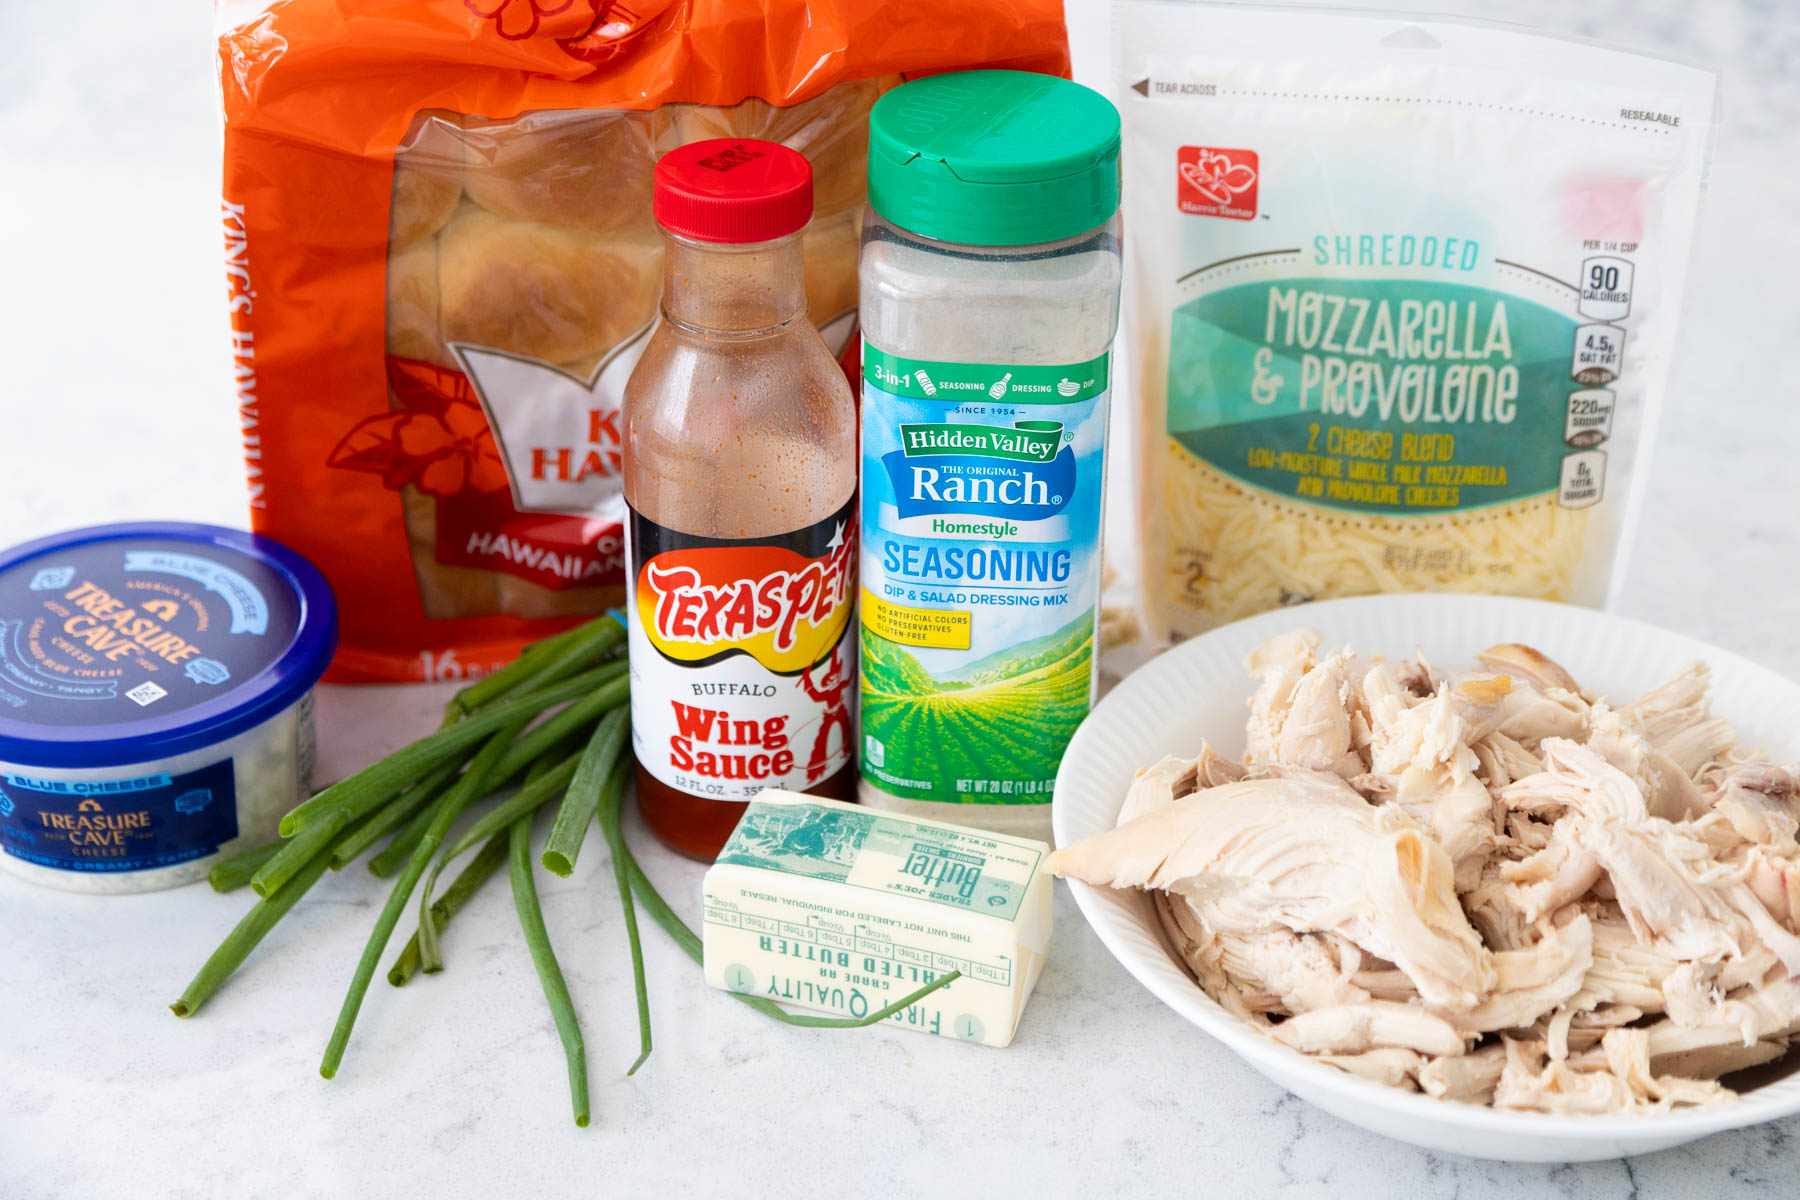 The ingredients to make buffalo chicken sliders are on the kitchen counter.